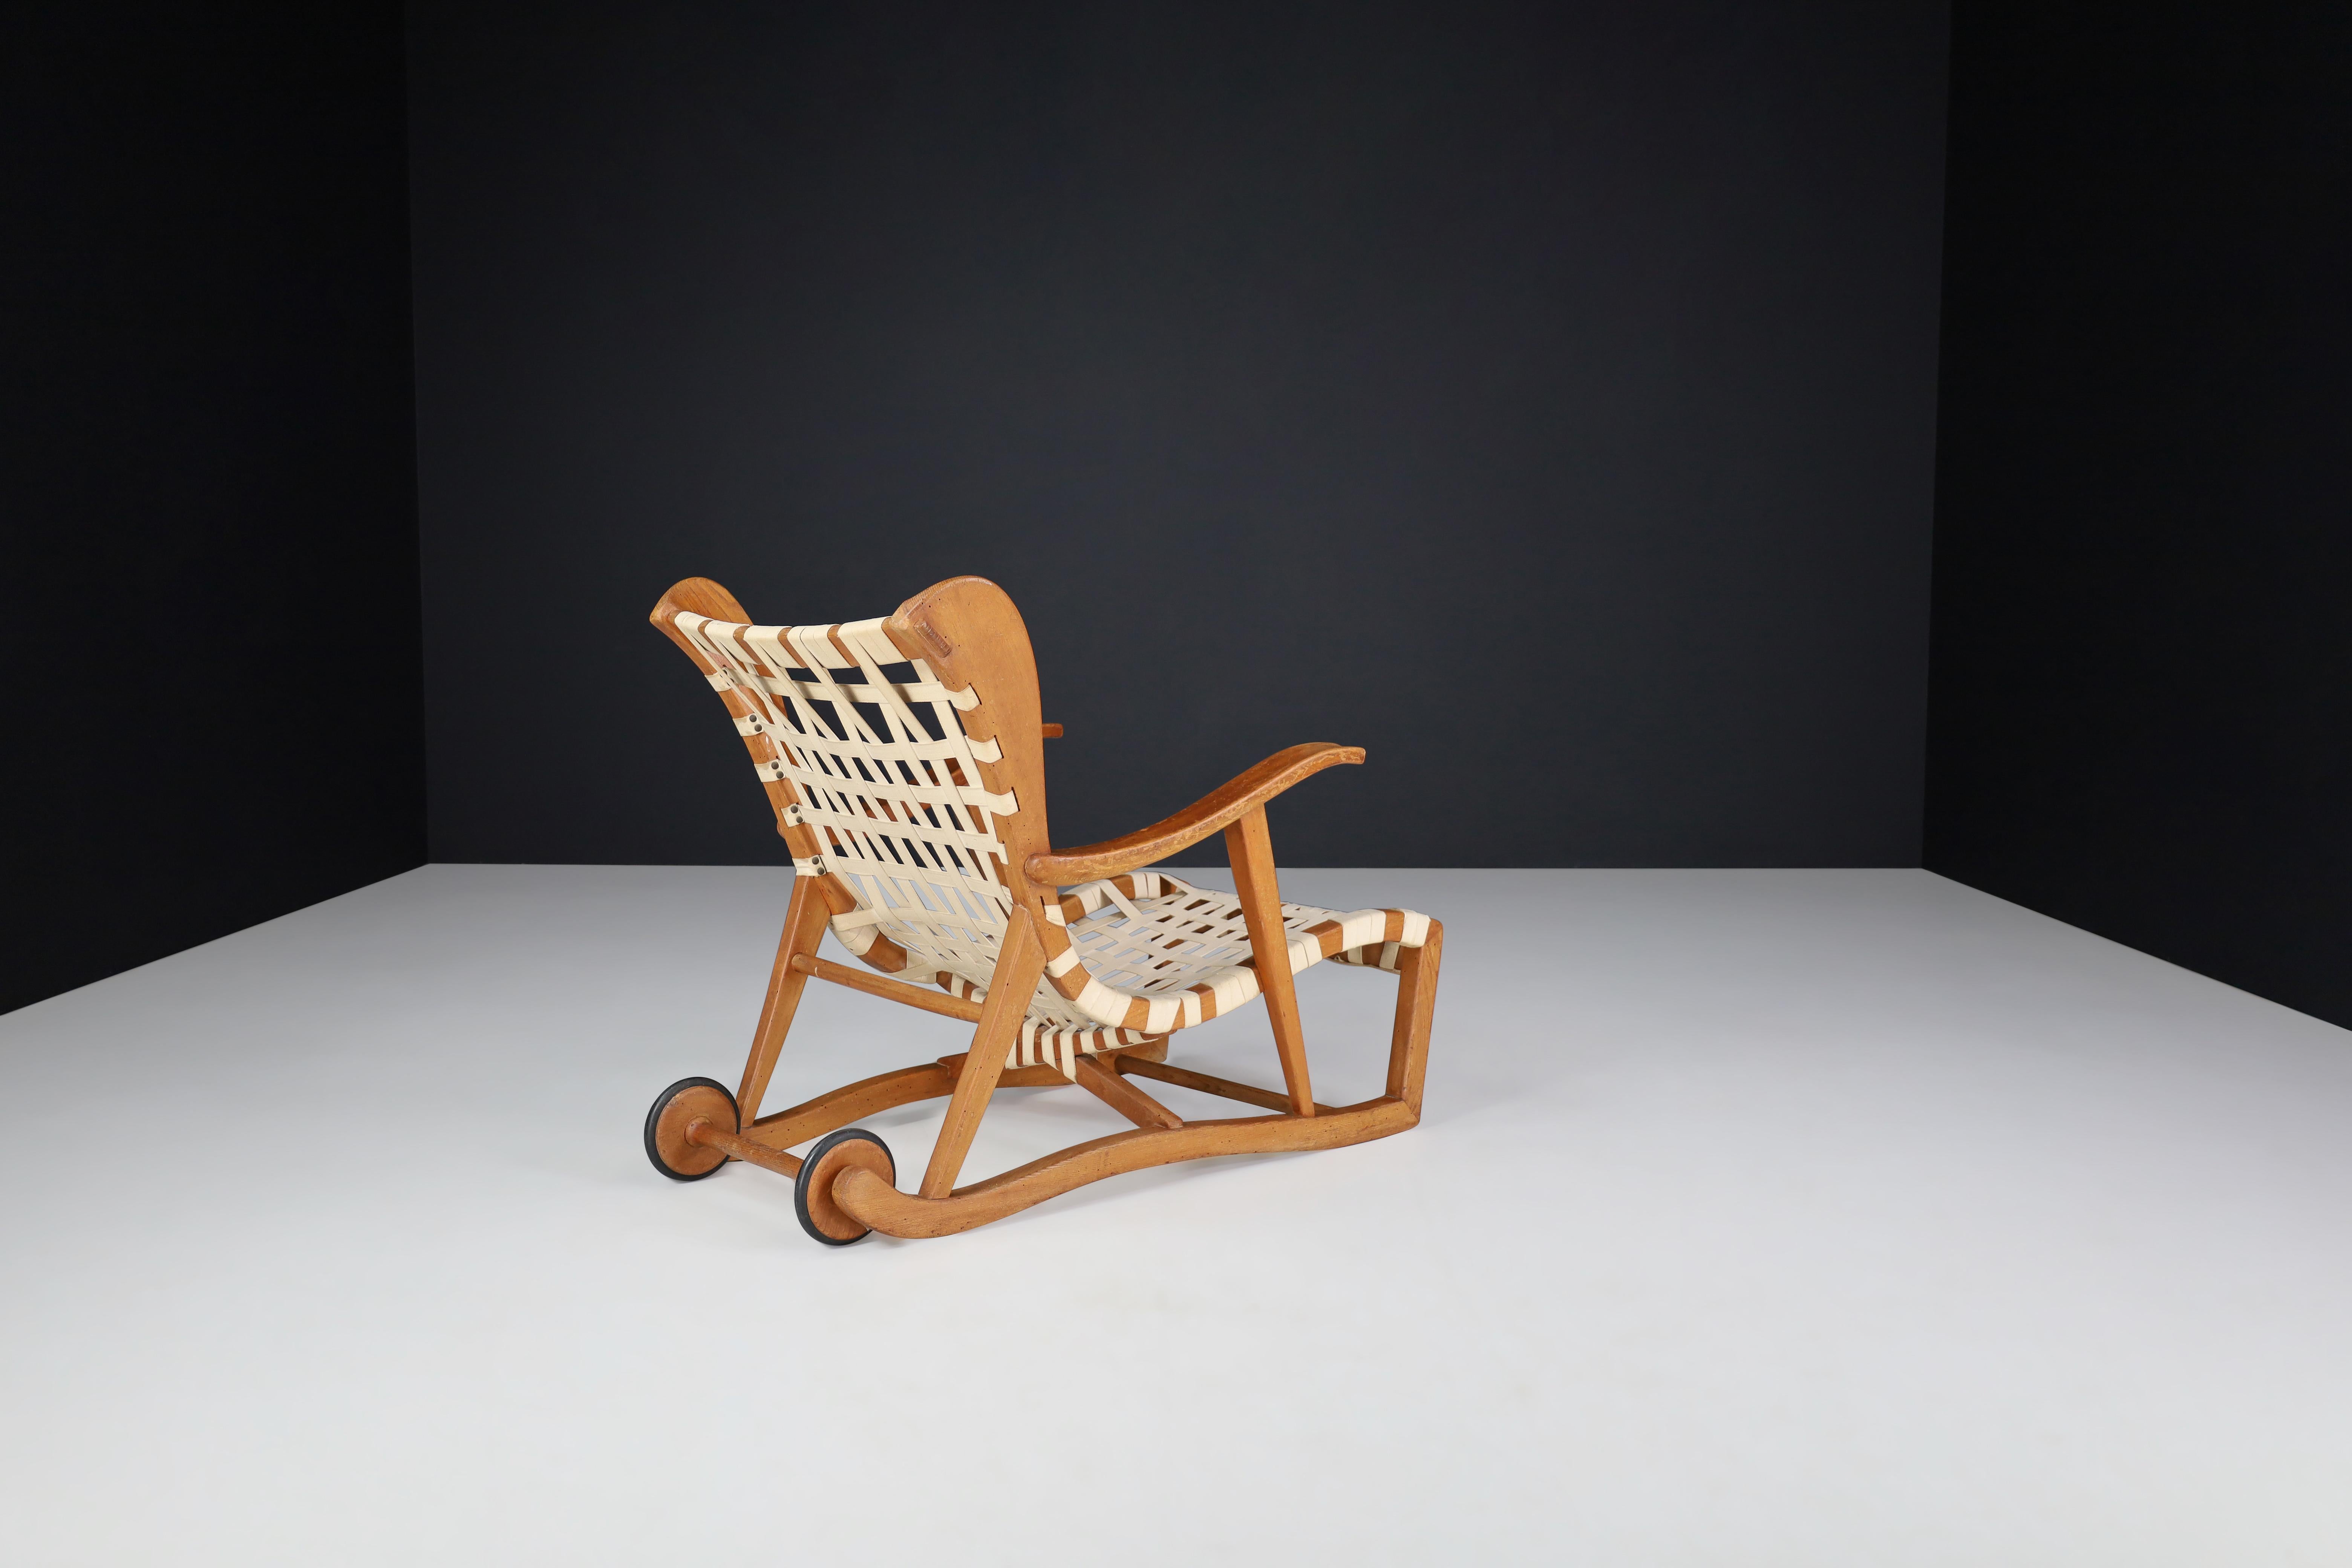 Sculptural Oak Lounge Chair by Guglielmo Pecorini, Italy, the 1950s For Sale 2